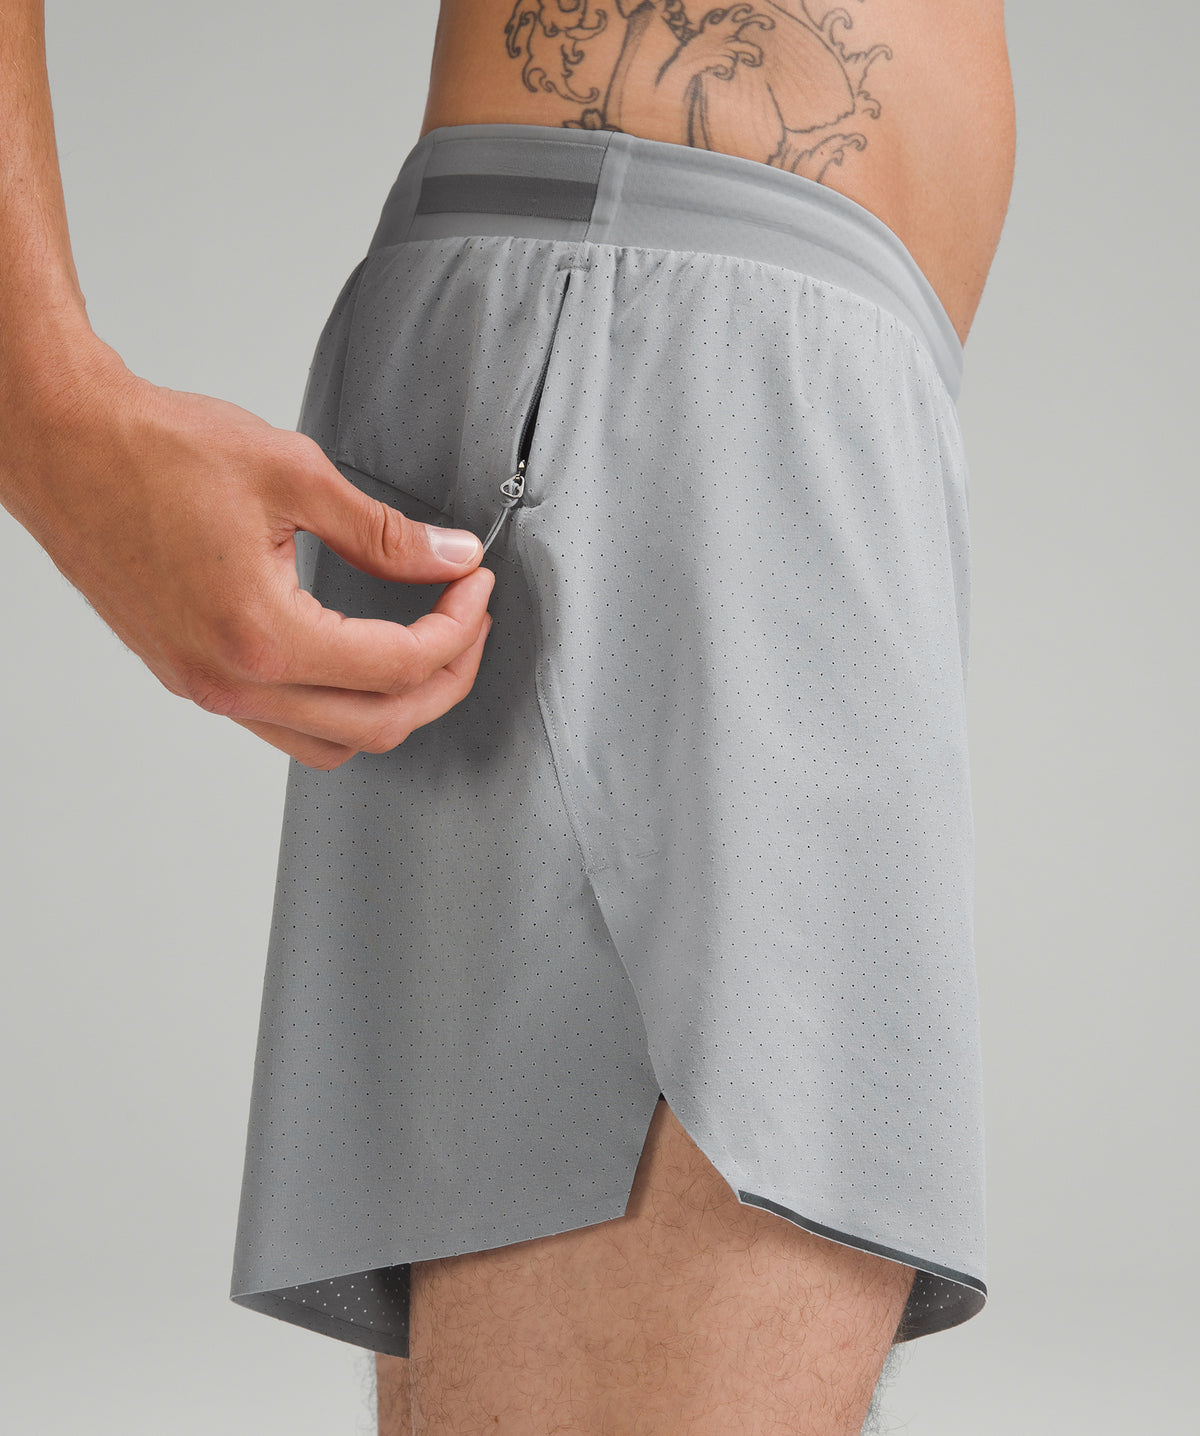 Lululemon athletica Fast and Free Linerless Short 6, Men's Shorts